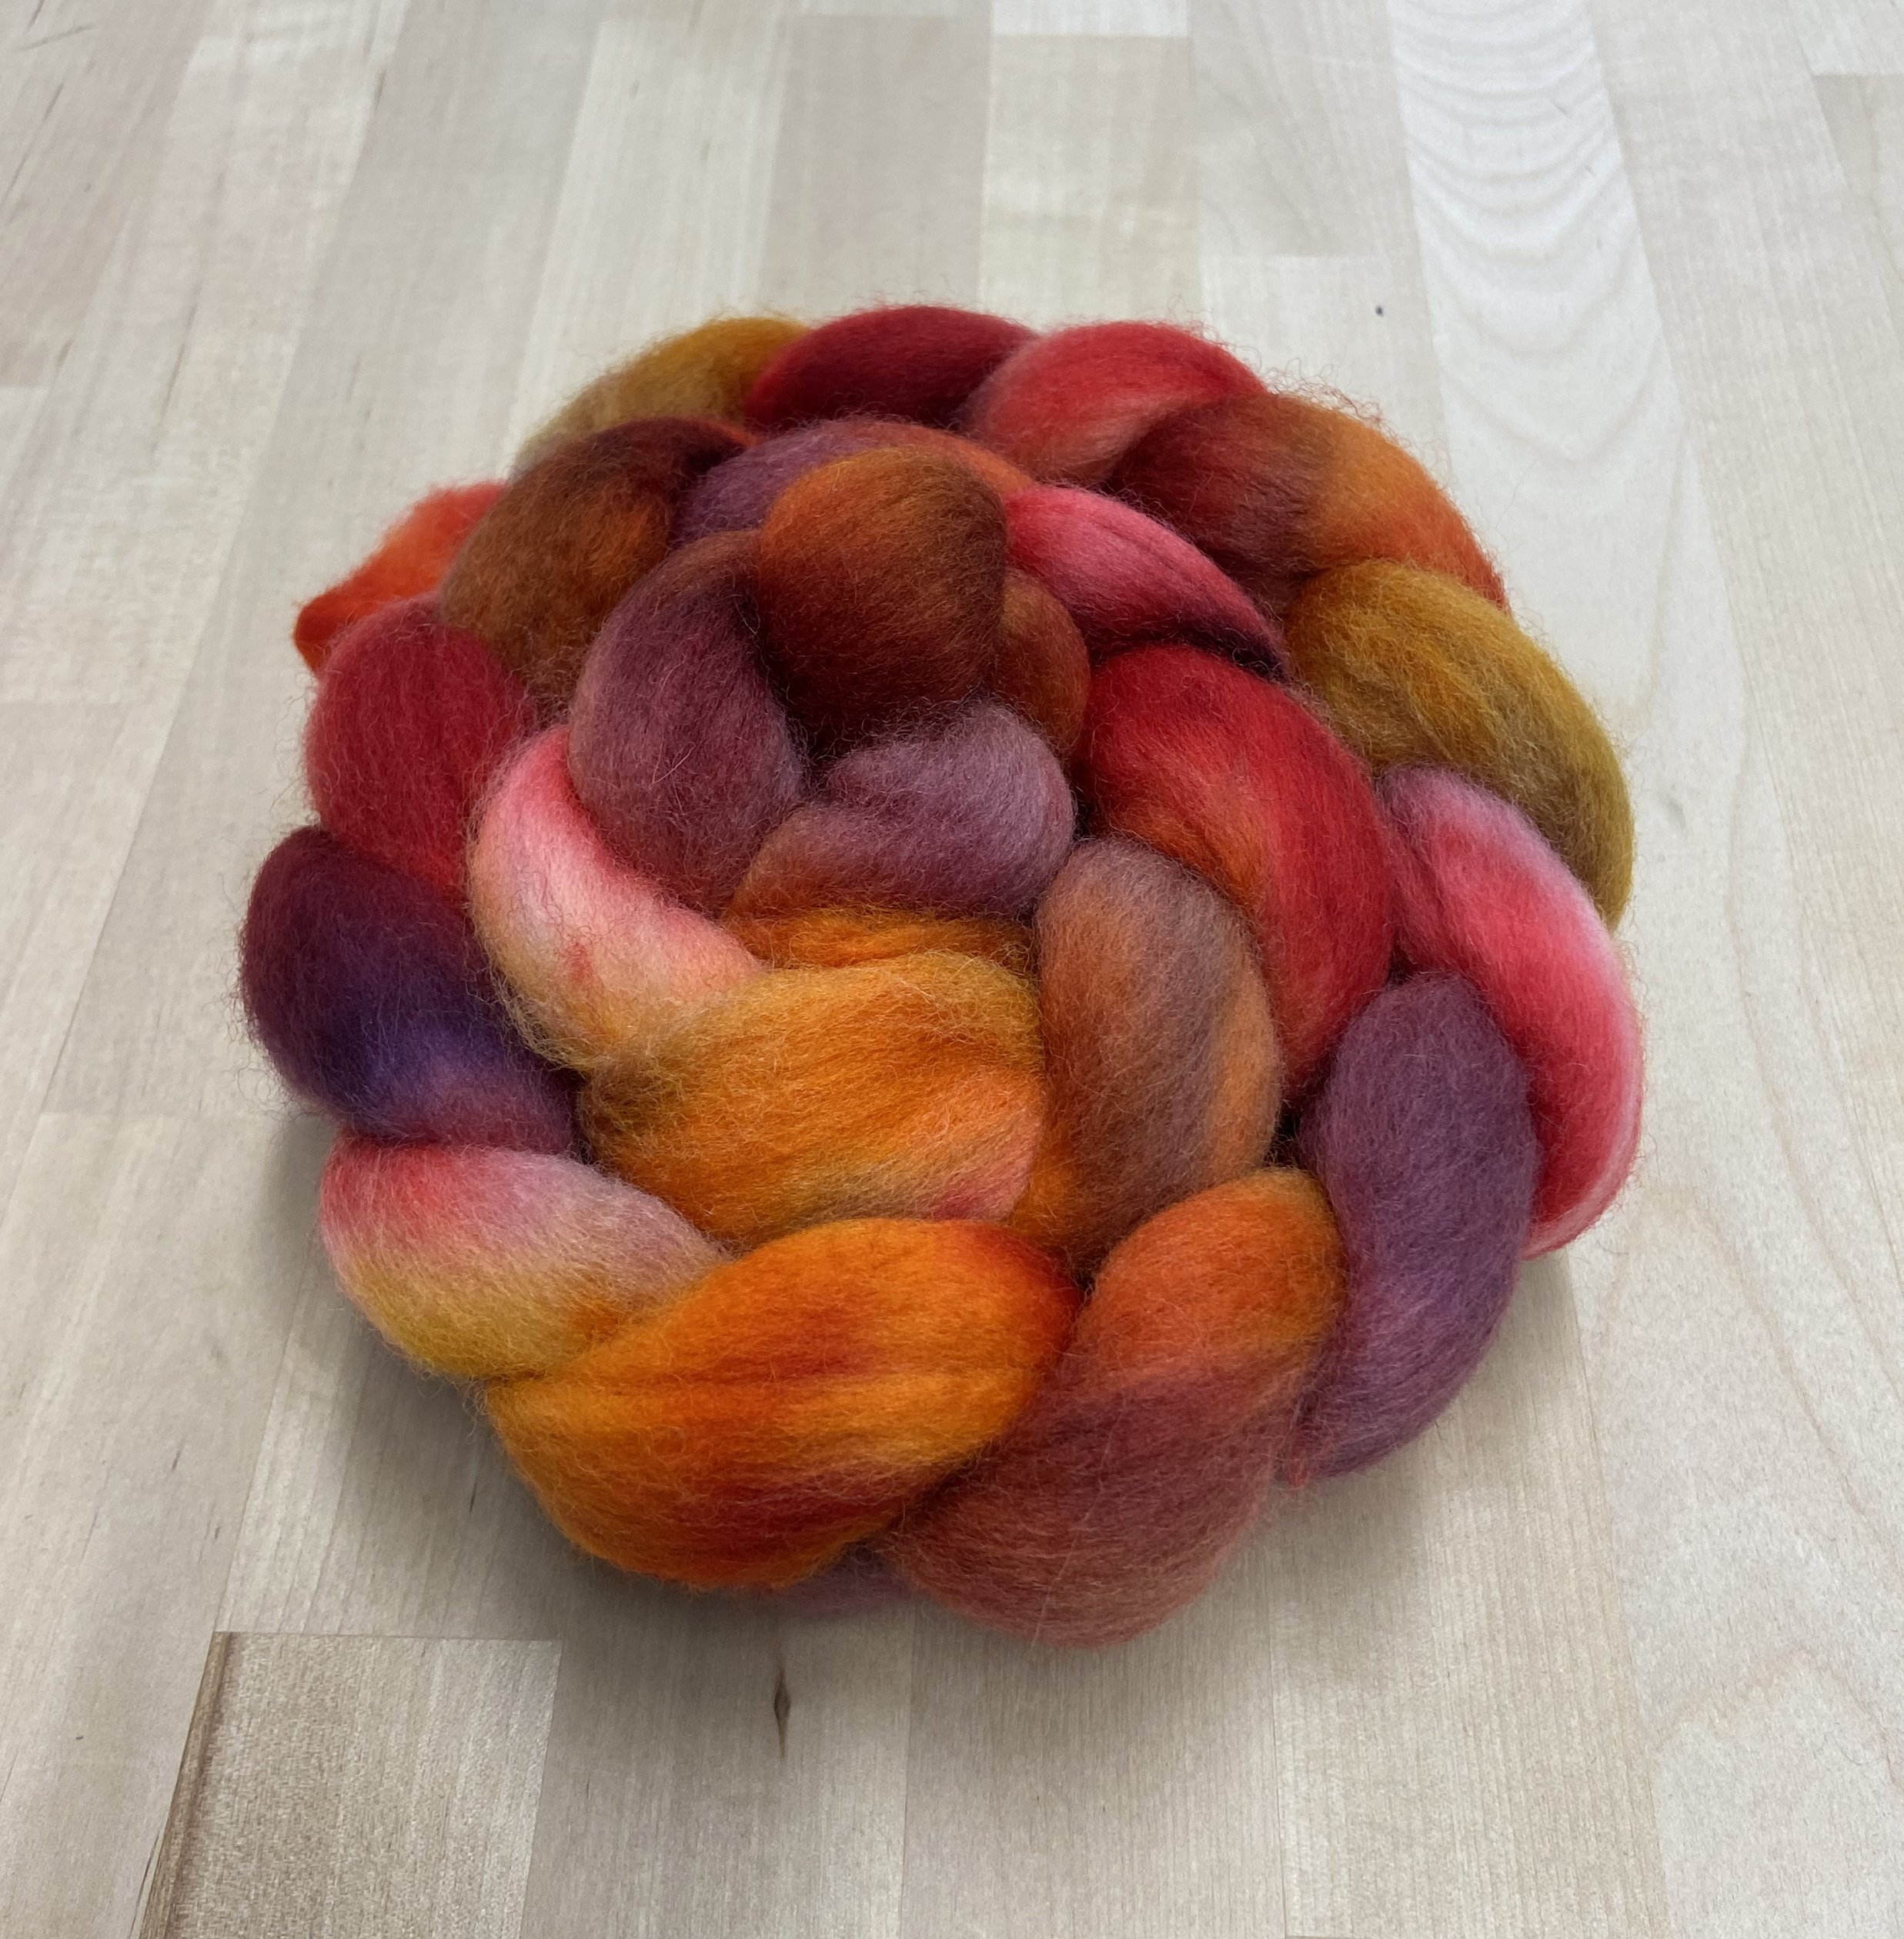 Rug Hooking Wool Roving or Fleece - Roughly 4 Ounce of Hand Dyed Fluff Wool  for Rug Hooking, Felting, Spinning and More - The Reds — loop by loop